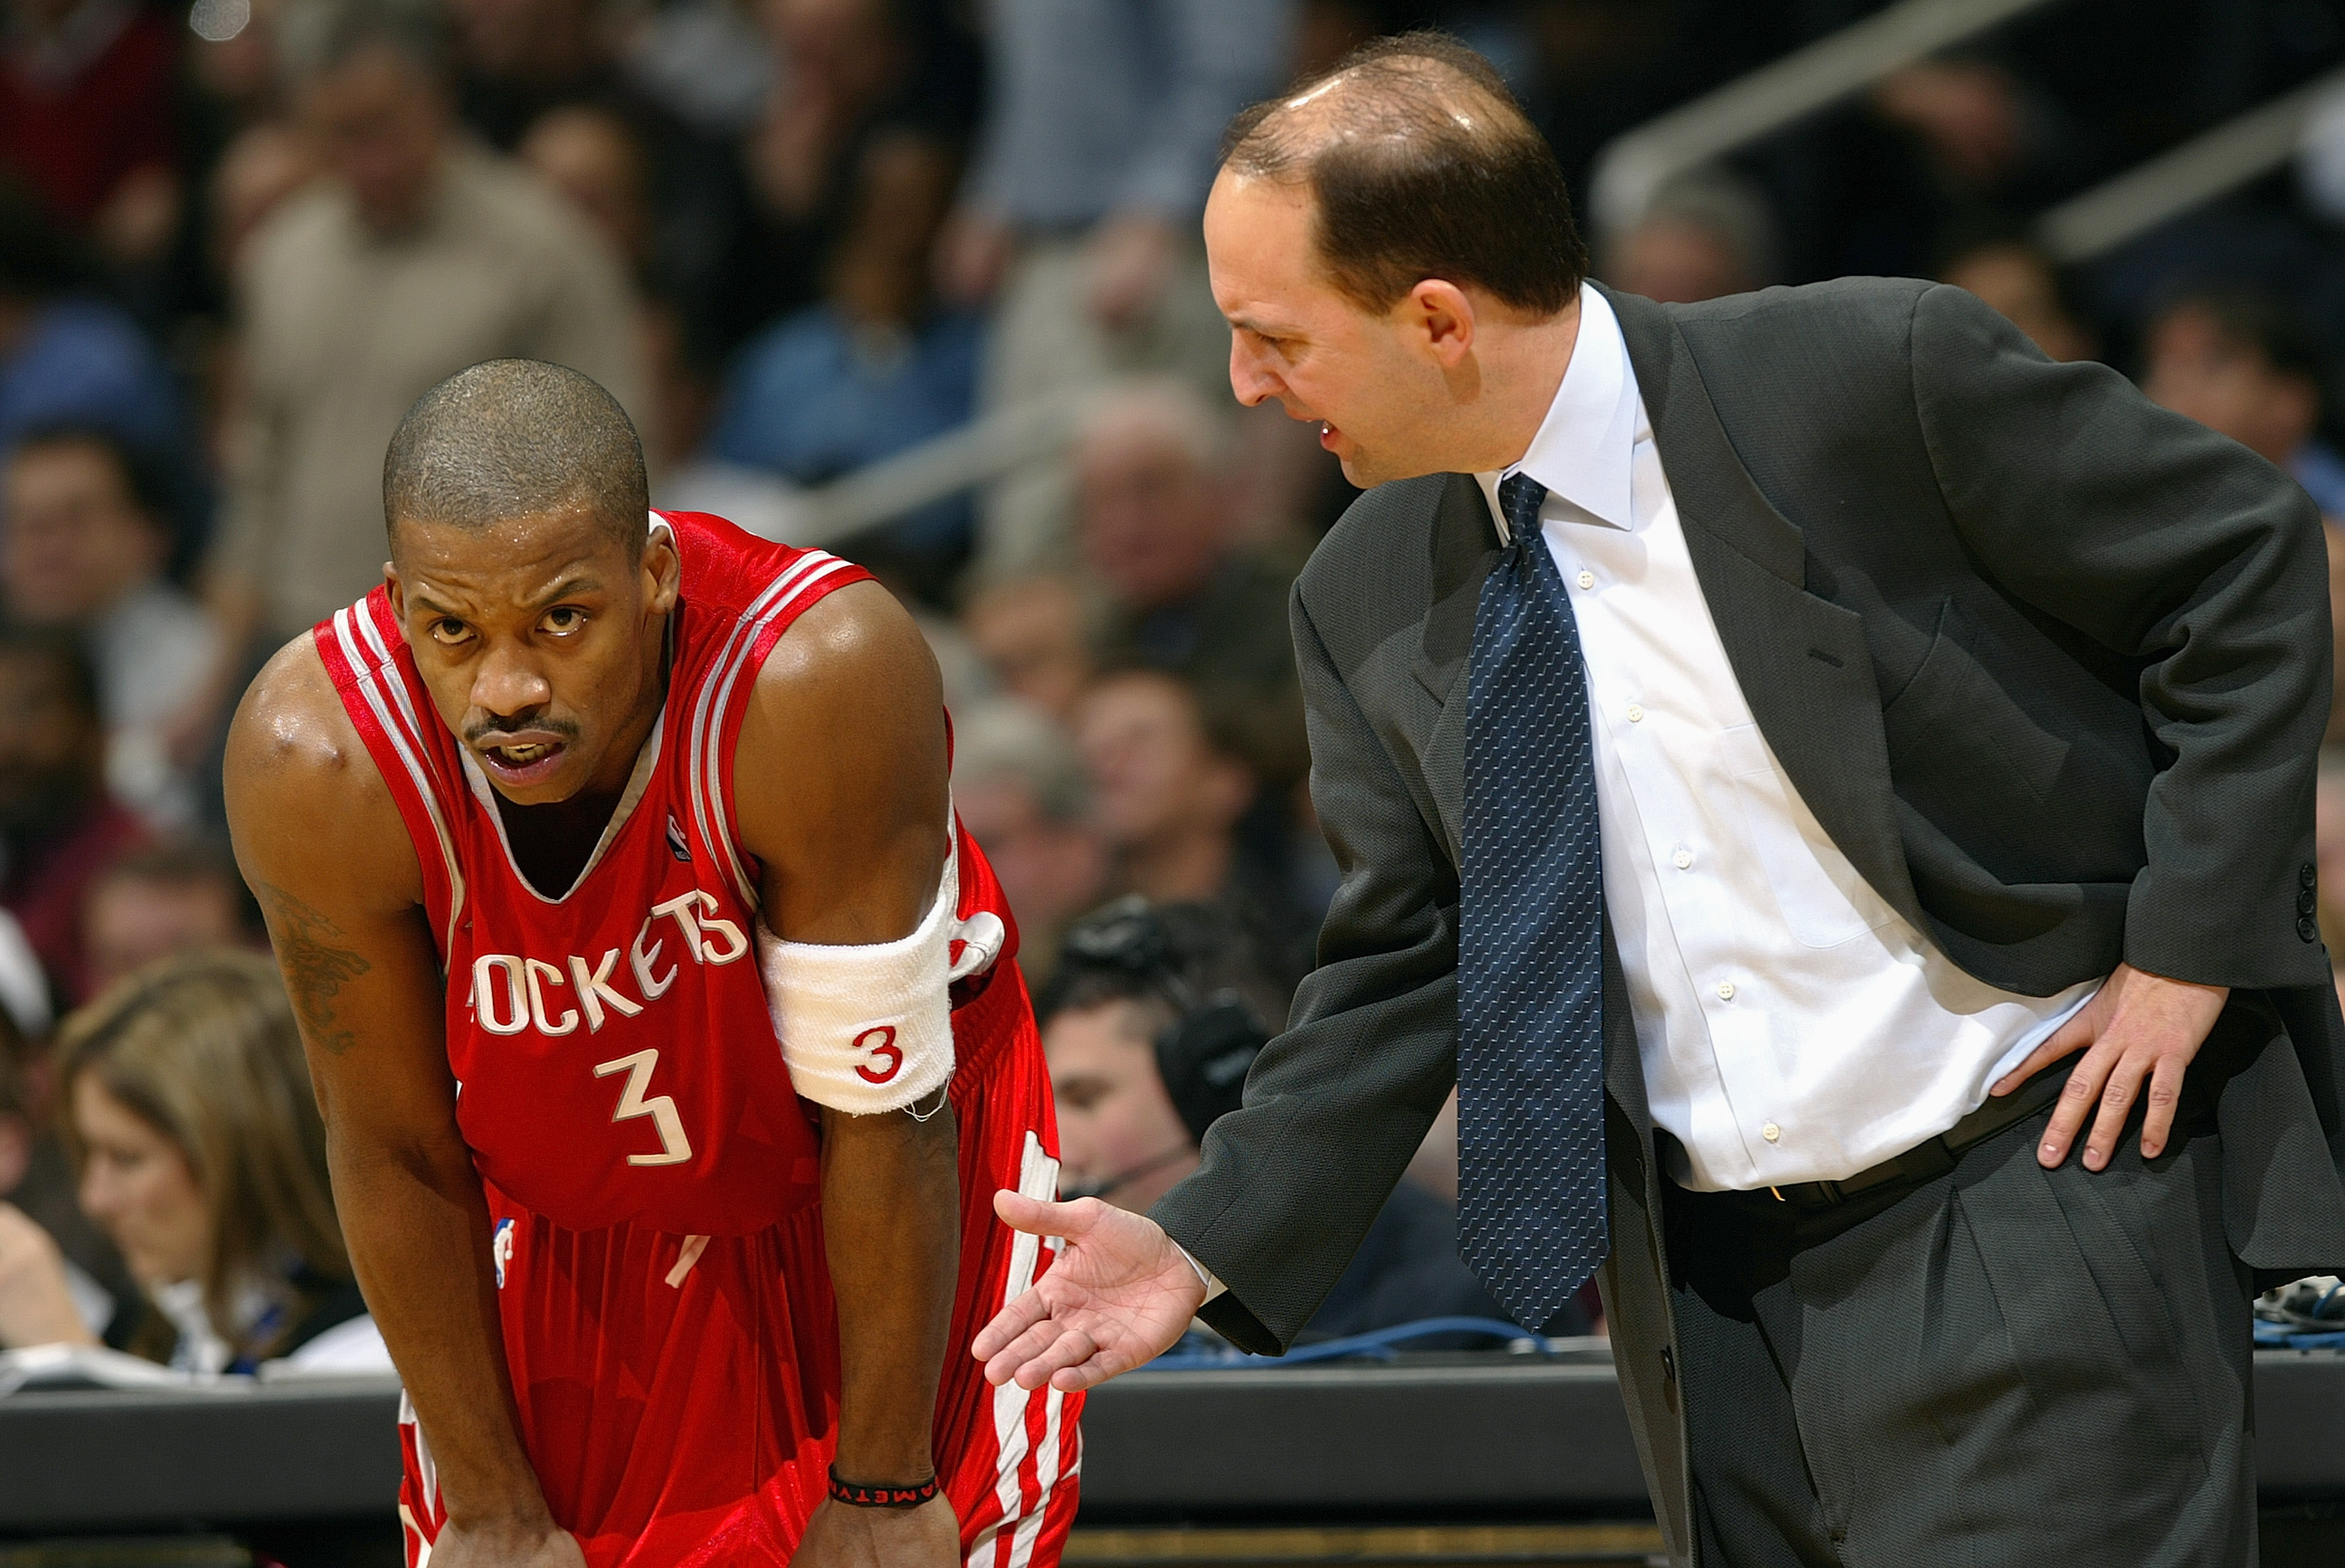 WASHINGTON - JANUARY 13:  Head coach Jeff Van Gundy of the Houston Rockets talks to his teammate Steve Francis #3 during the game against the Washington Wizards at MCI Center on January 13, 2004 in Washington, DC.  The Rockets won 93-80.  NOTE TO USER: Us